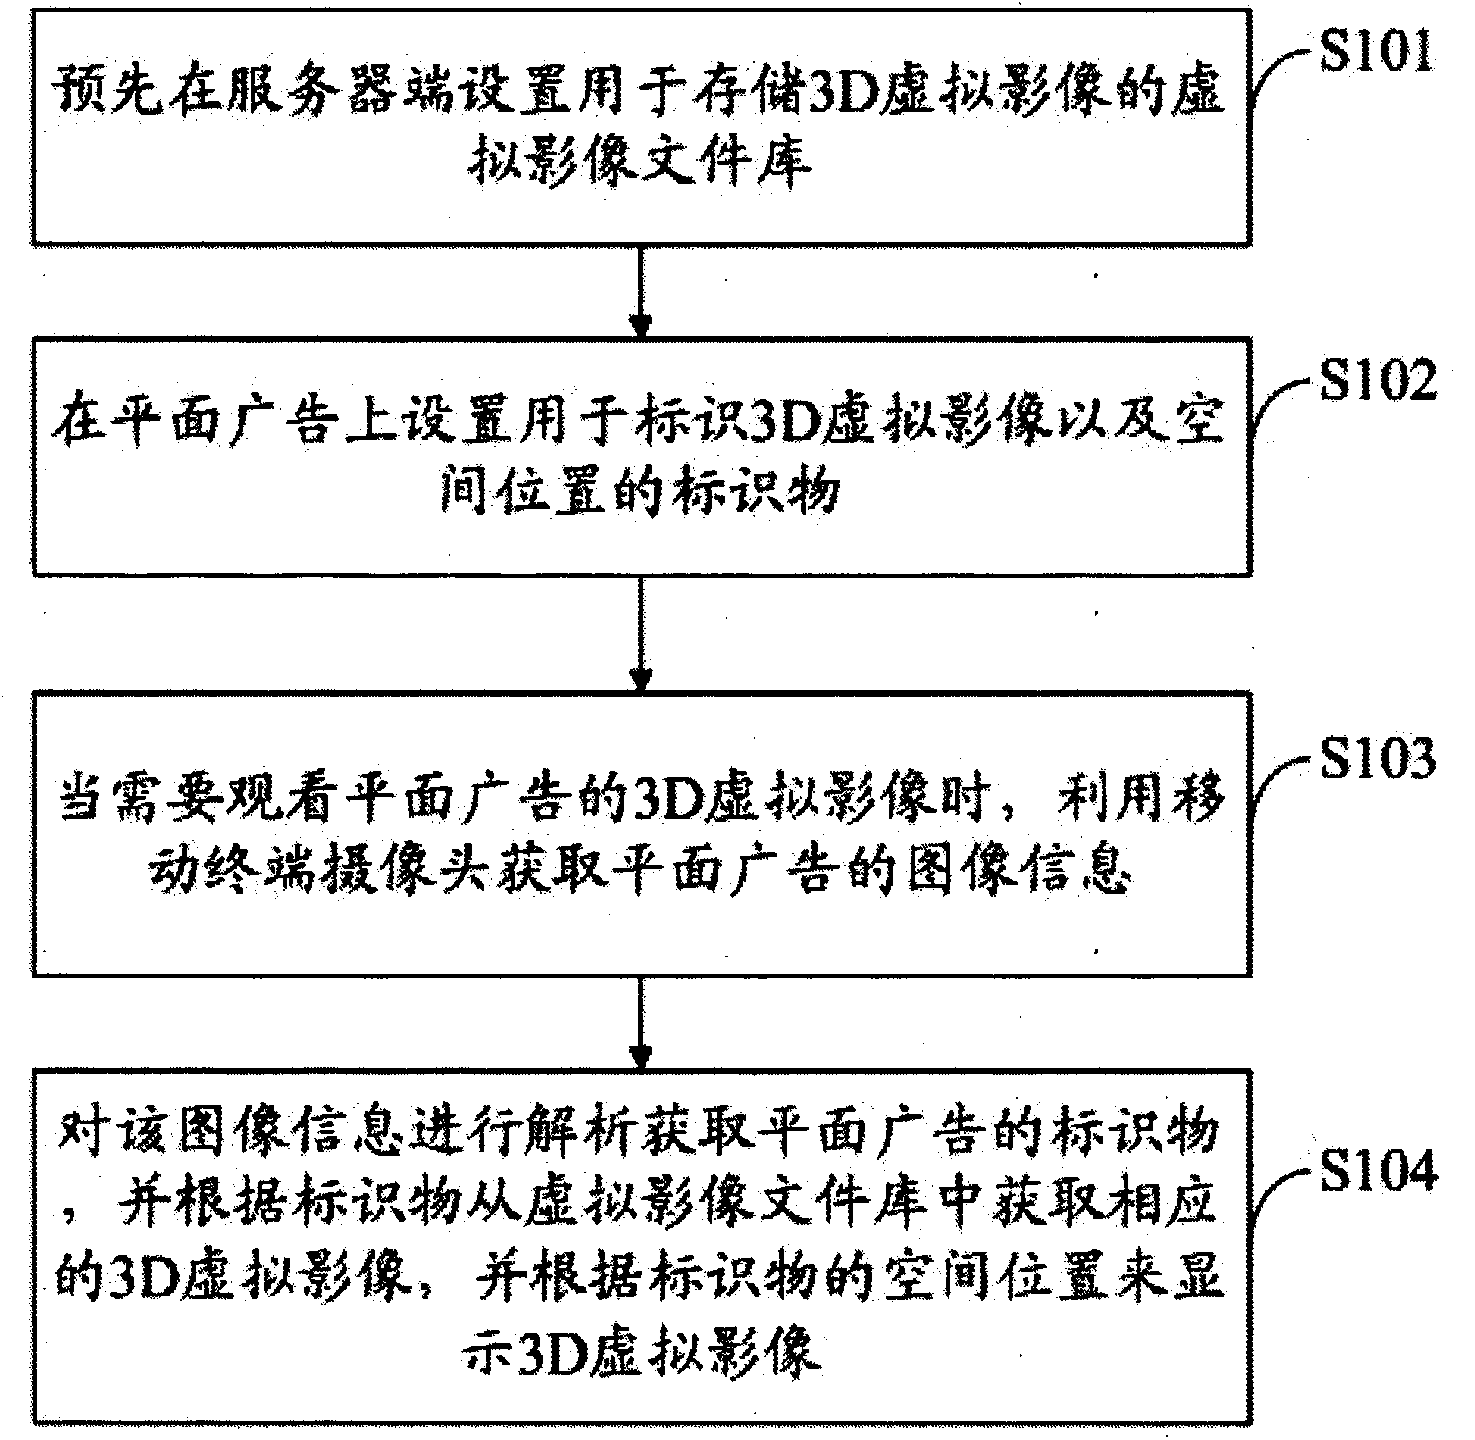 System and method for achieving 3D virtual advertisement with mobile terminal